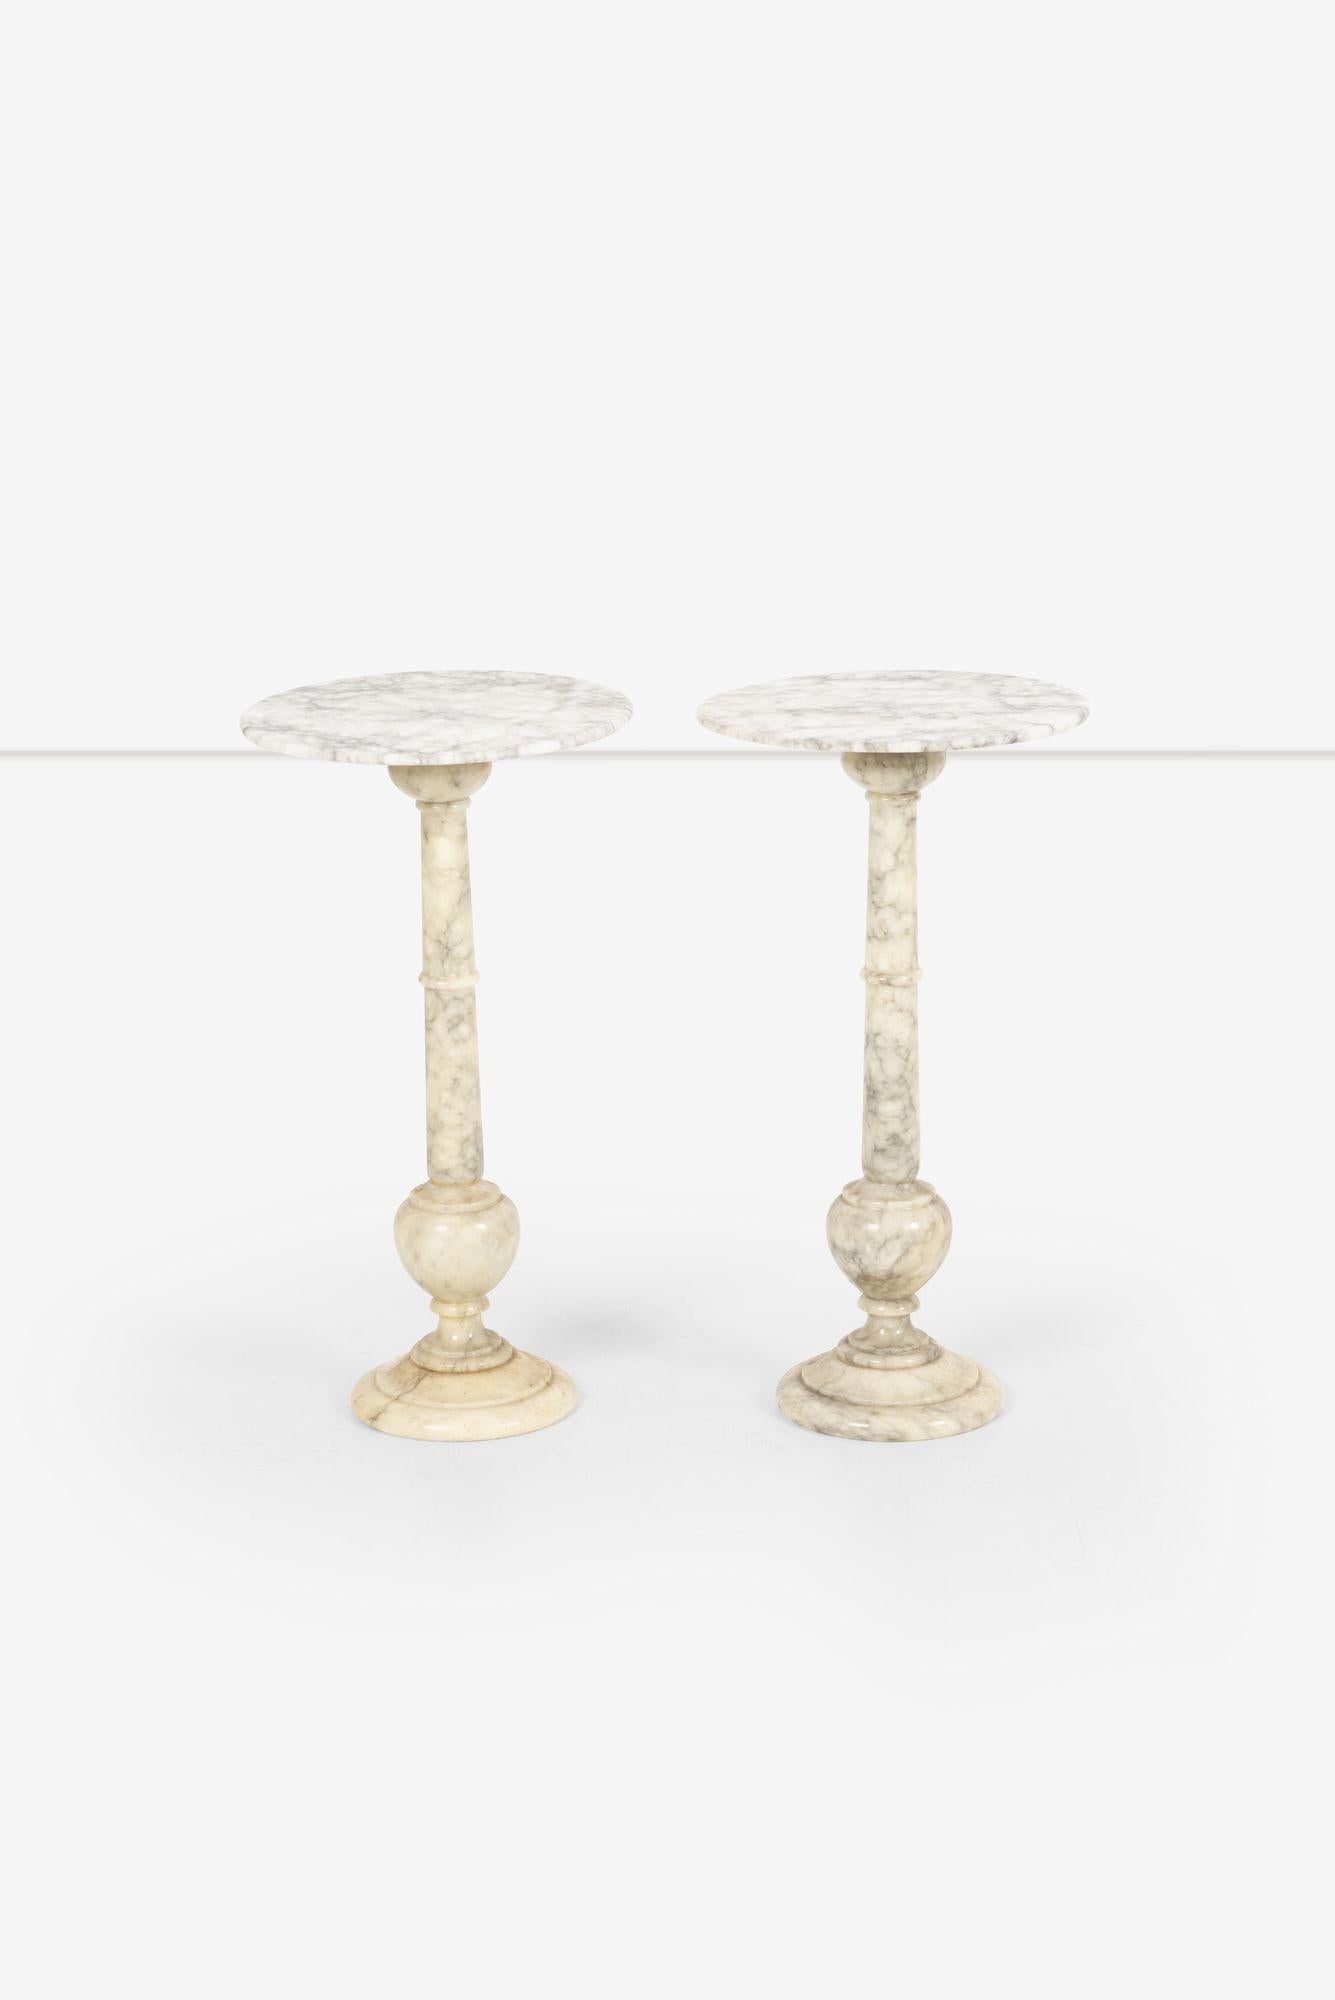 Pair of Alabaster end tables or plant or display collums.
Hand carved highly figured Alabaster made in Italy.